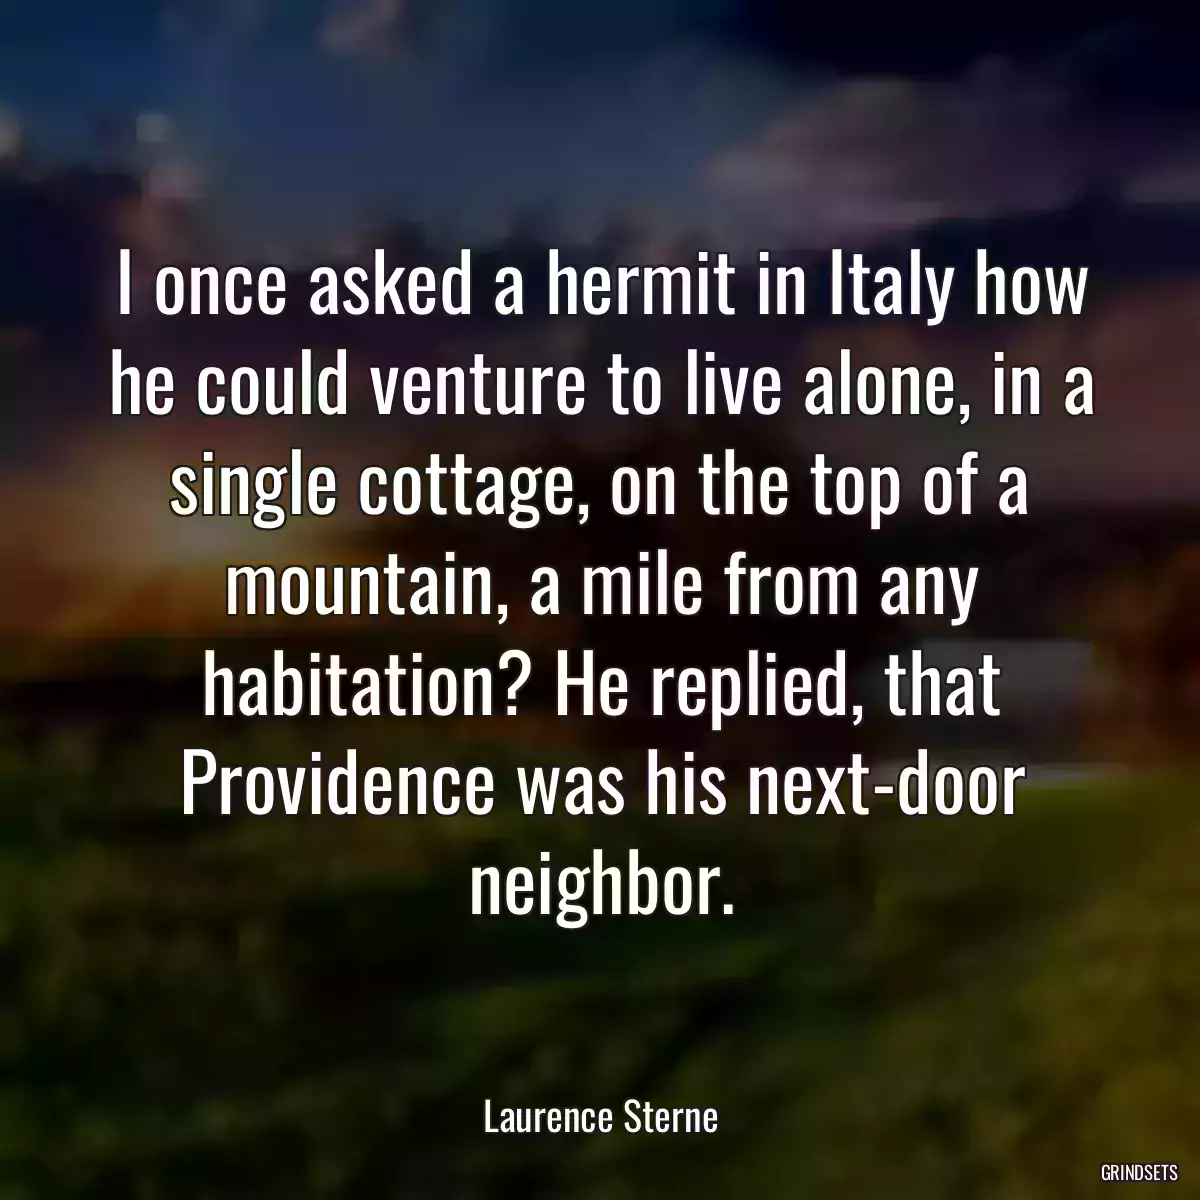 I once asked a hermit in Italy how he could venture to live alone, in a single cottage, on the top of a mountain, a mile from any habitation? He replied, that Providence was his next-door neighbor.